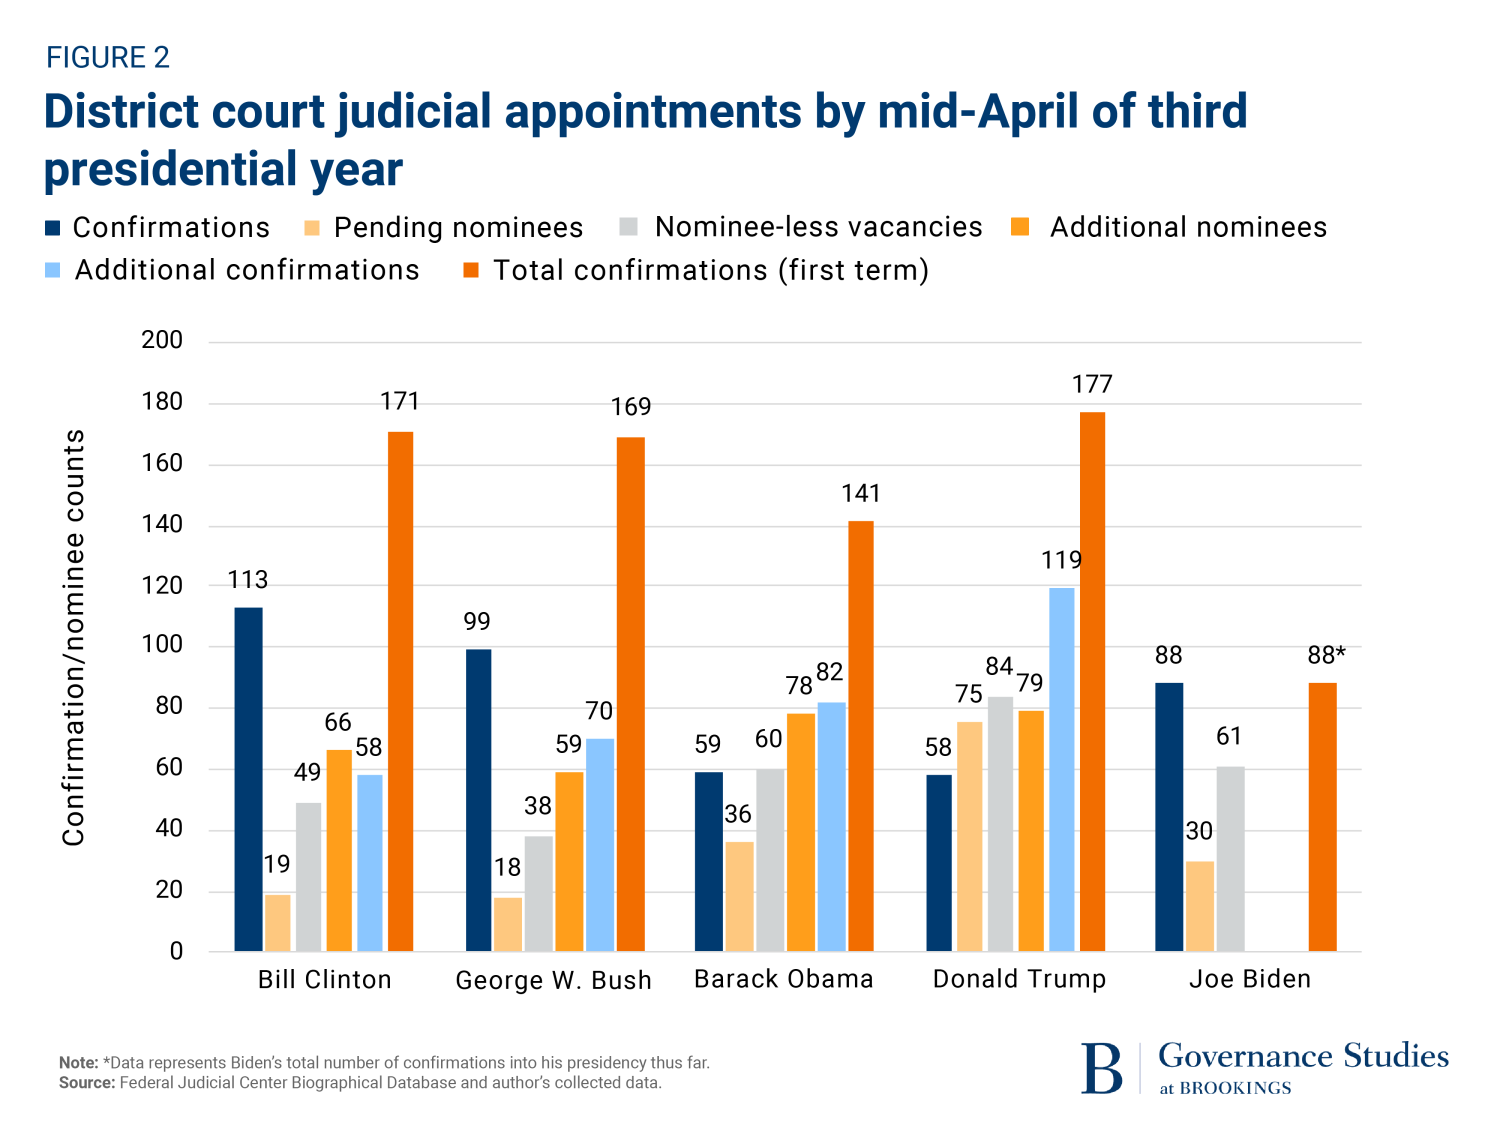 judicial appointments mid-aril of third presidential year, Clinton to Biden